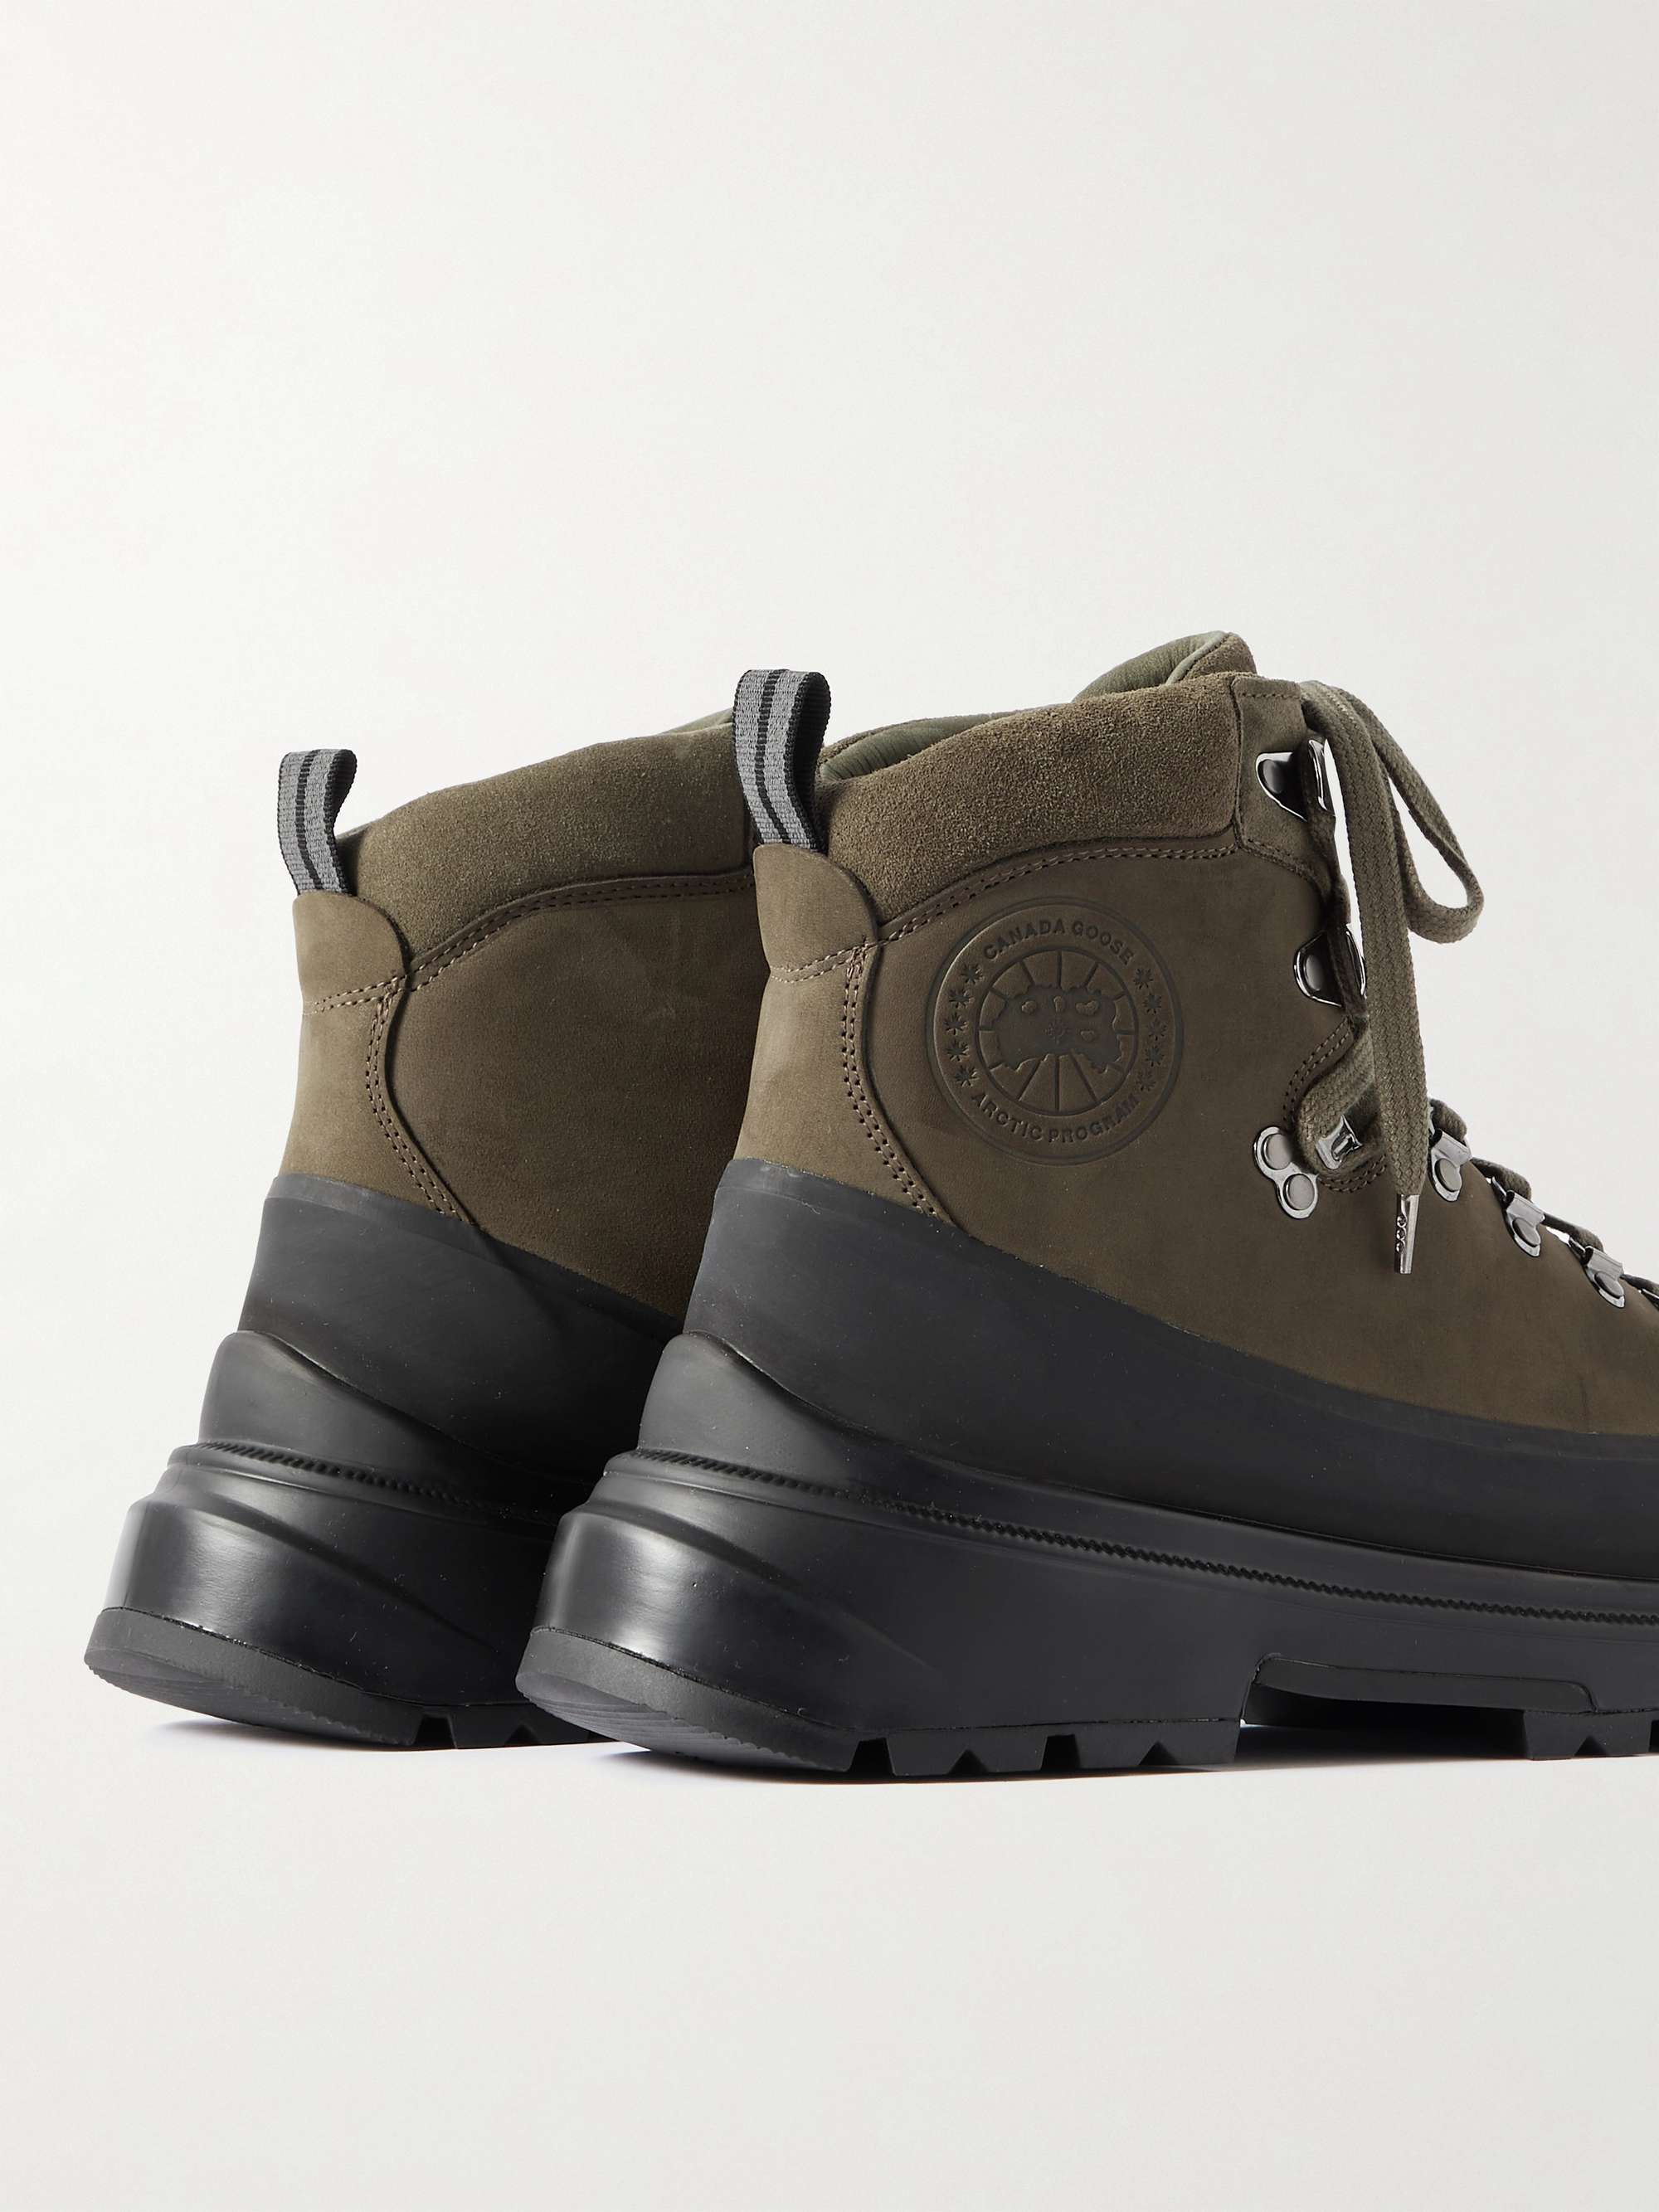 CANADA GOOSE Journey Rubber and Nubuck-Trimmed Full-Grain Leather Hiking Boots